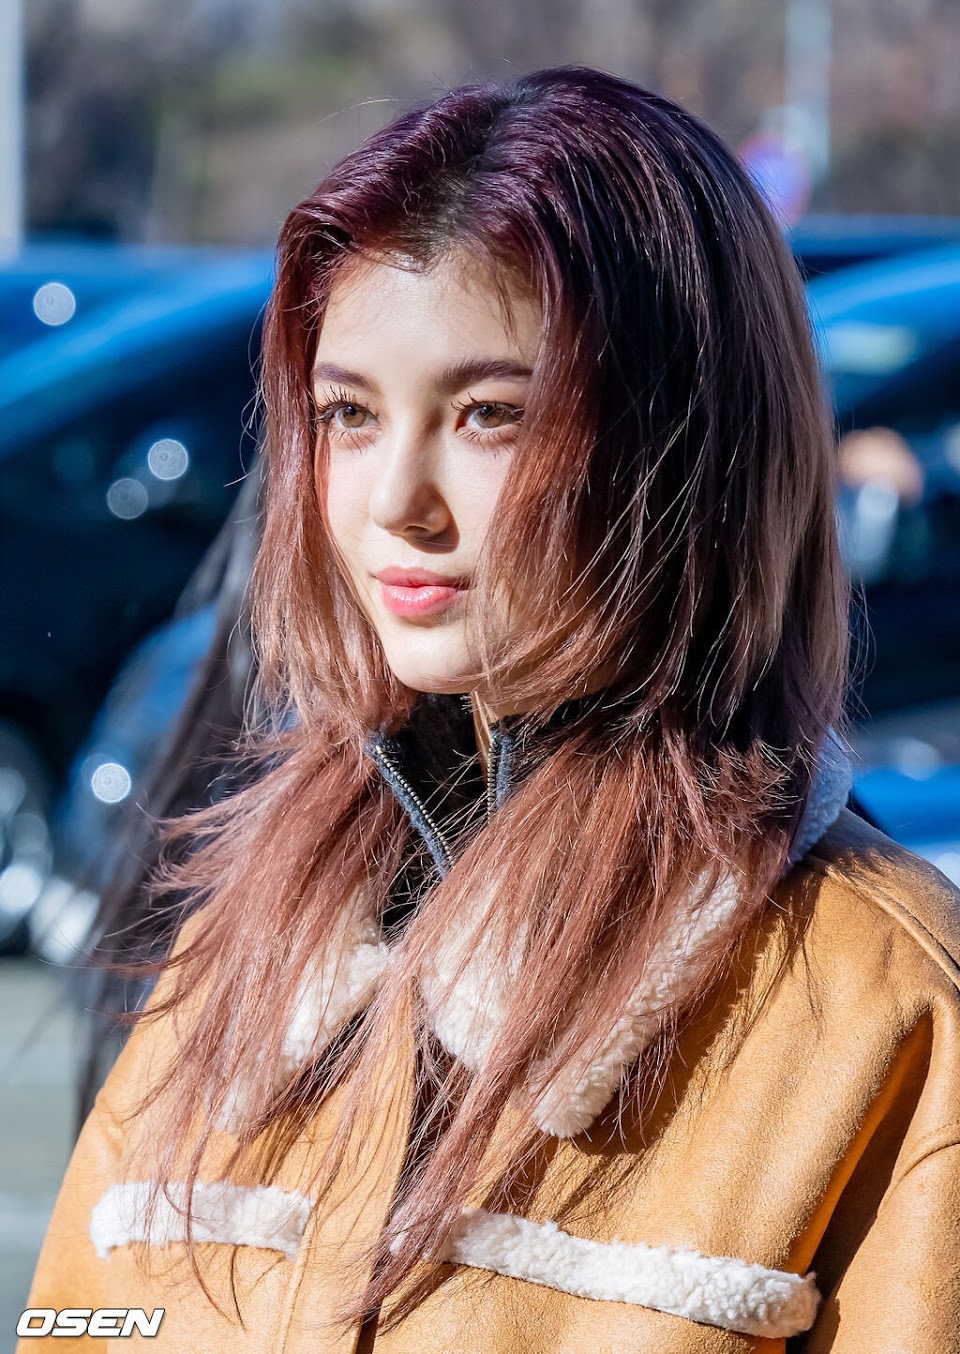 The Hairstyle Made For NewJeans' Danielle, According To Netizens - Koreaboo